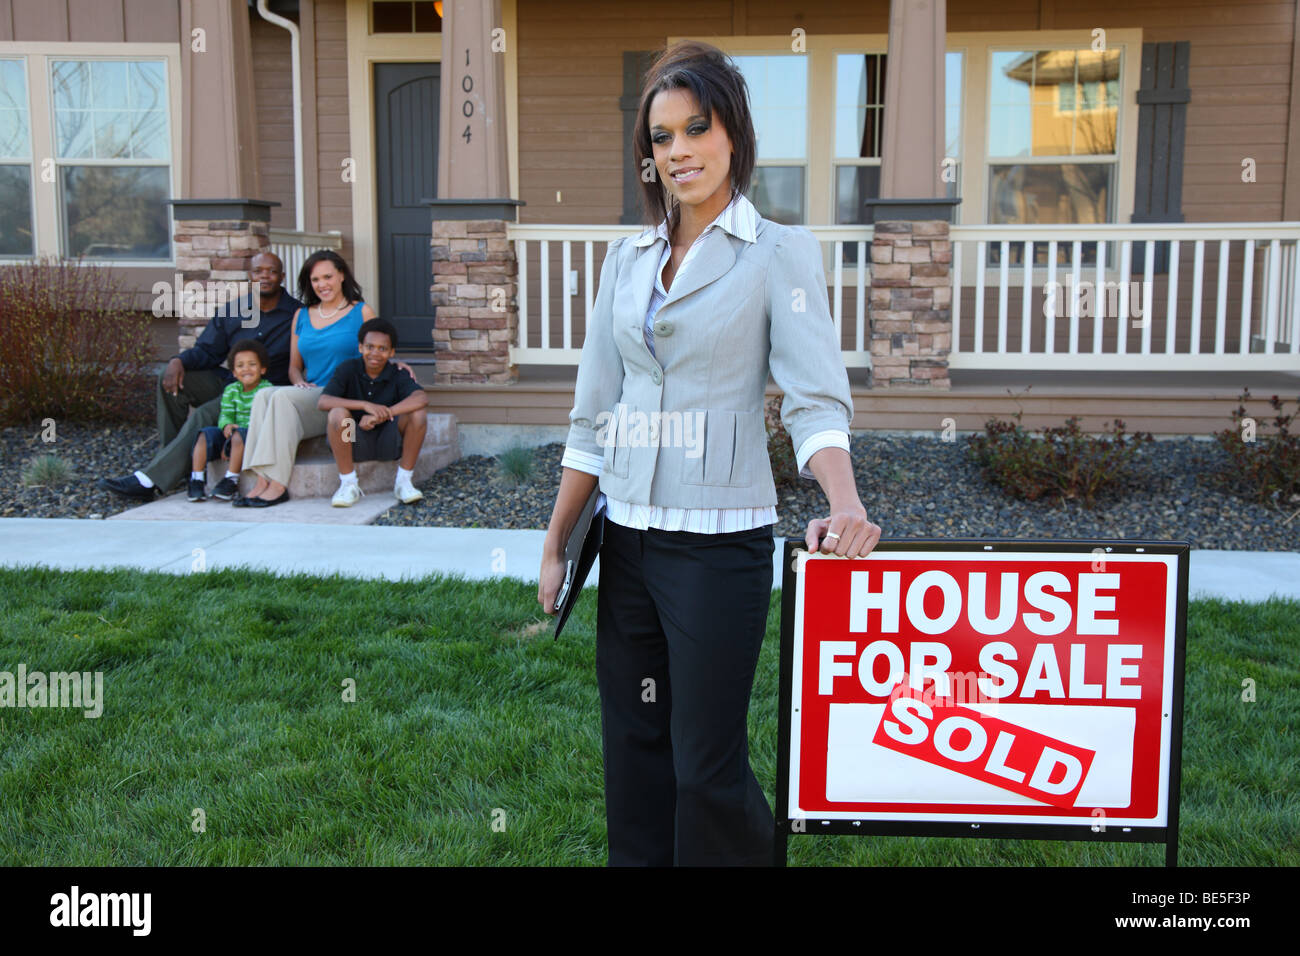 Realtor by sign with family in background on porch Stock Photo